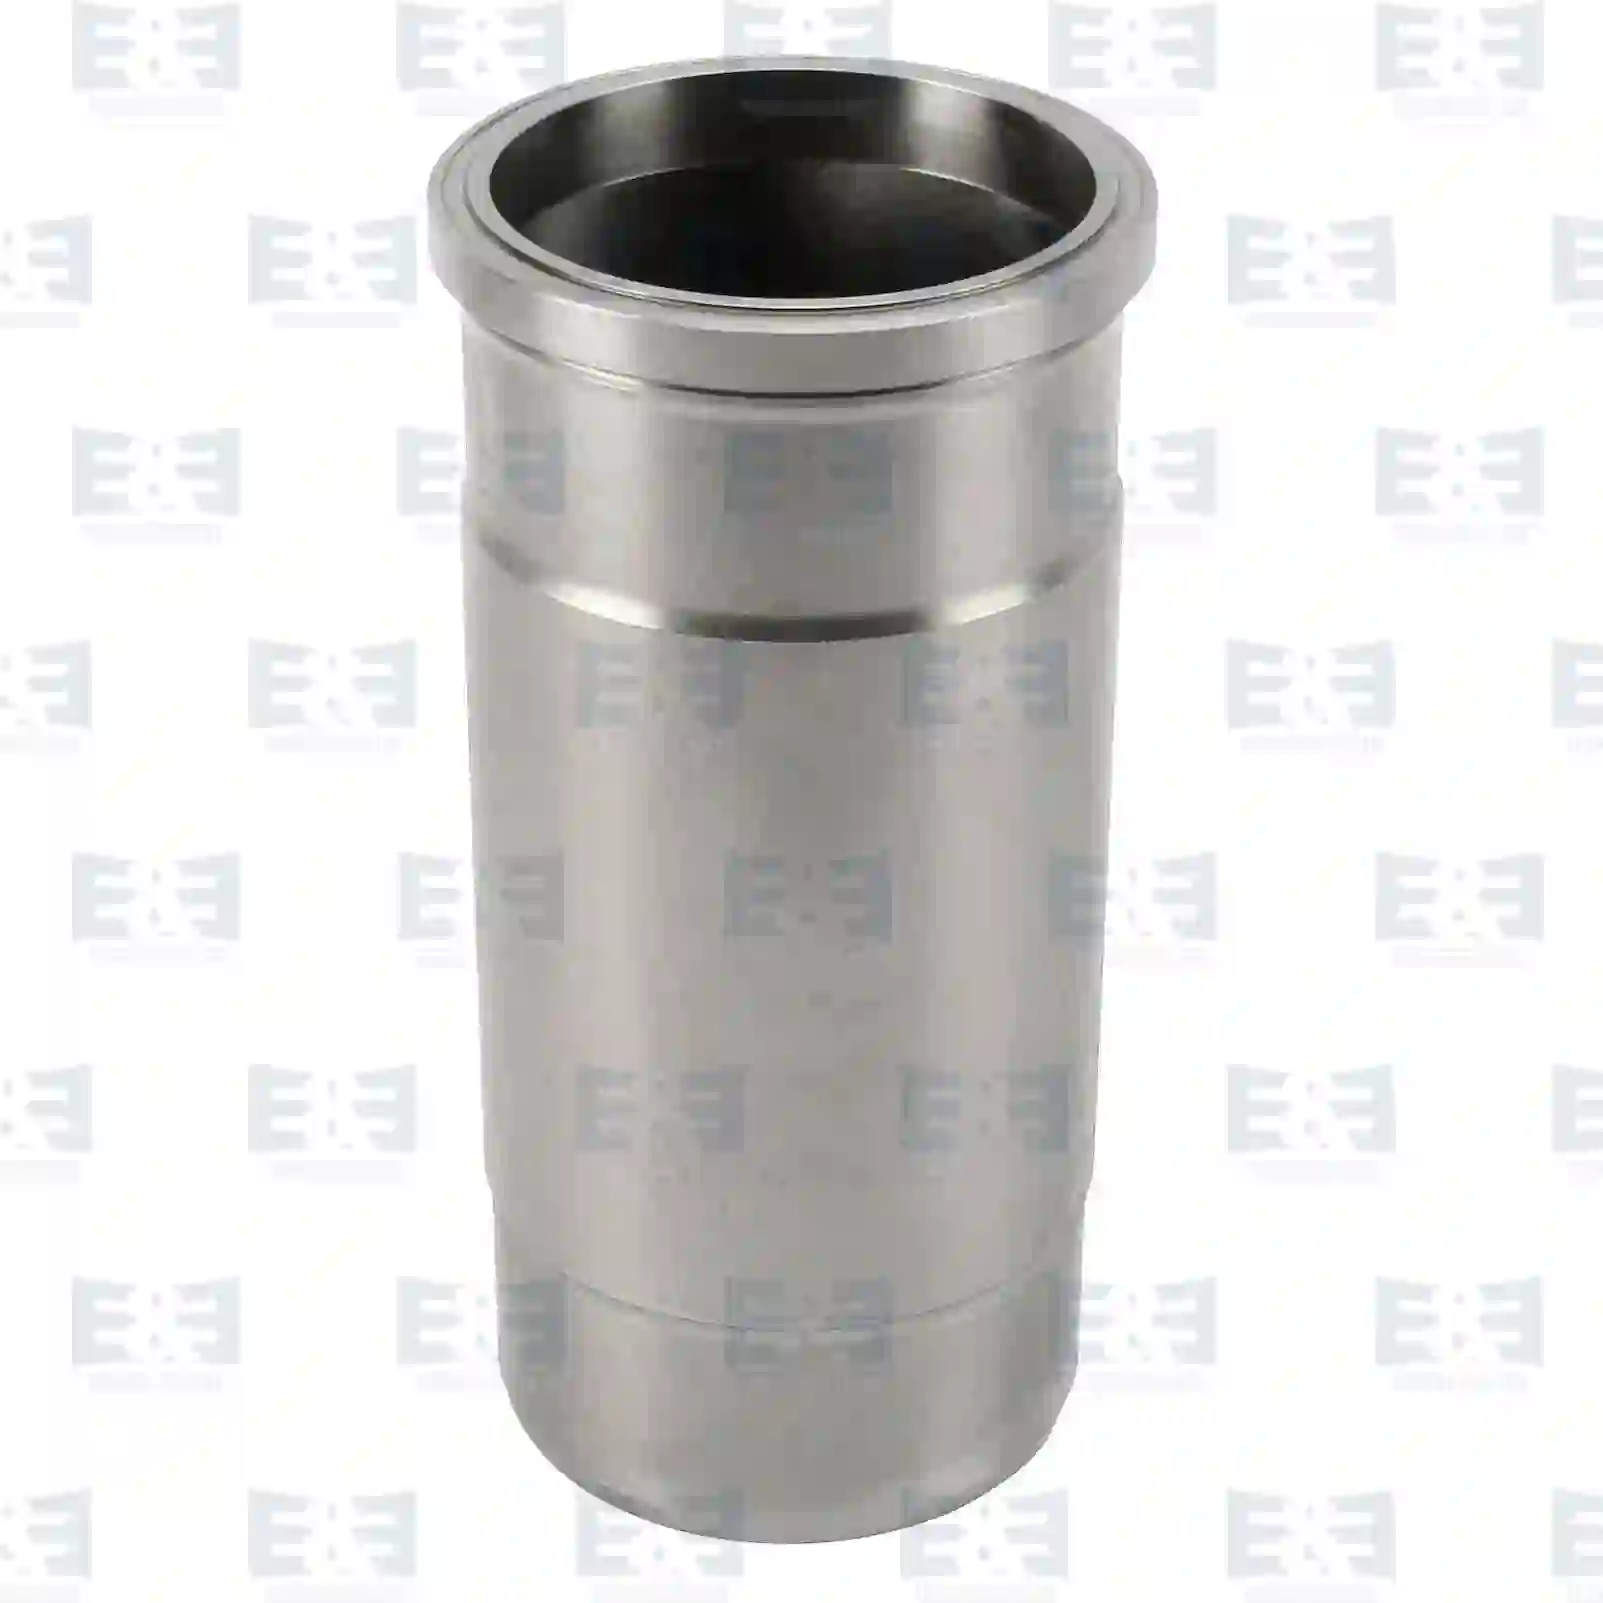 Cylinder liner, without seal rings, 2E2209633, 421430, 466260, 466864, 466865 ||  2E2209633 E&E Truck Spare Parts | Truck Spare Parts, Auotomotive Spare Parts Cylinder liner, without seal rings, 2E2209633, 421430, 466260, 466864, 466865 ||  2E2209633 E&E Truck Spare Parts | Truck Spare Parts, Auotomotive Spare Parts